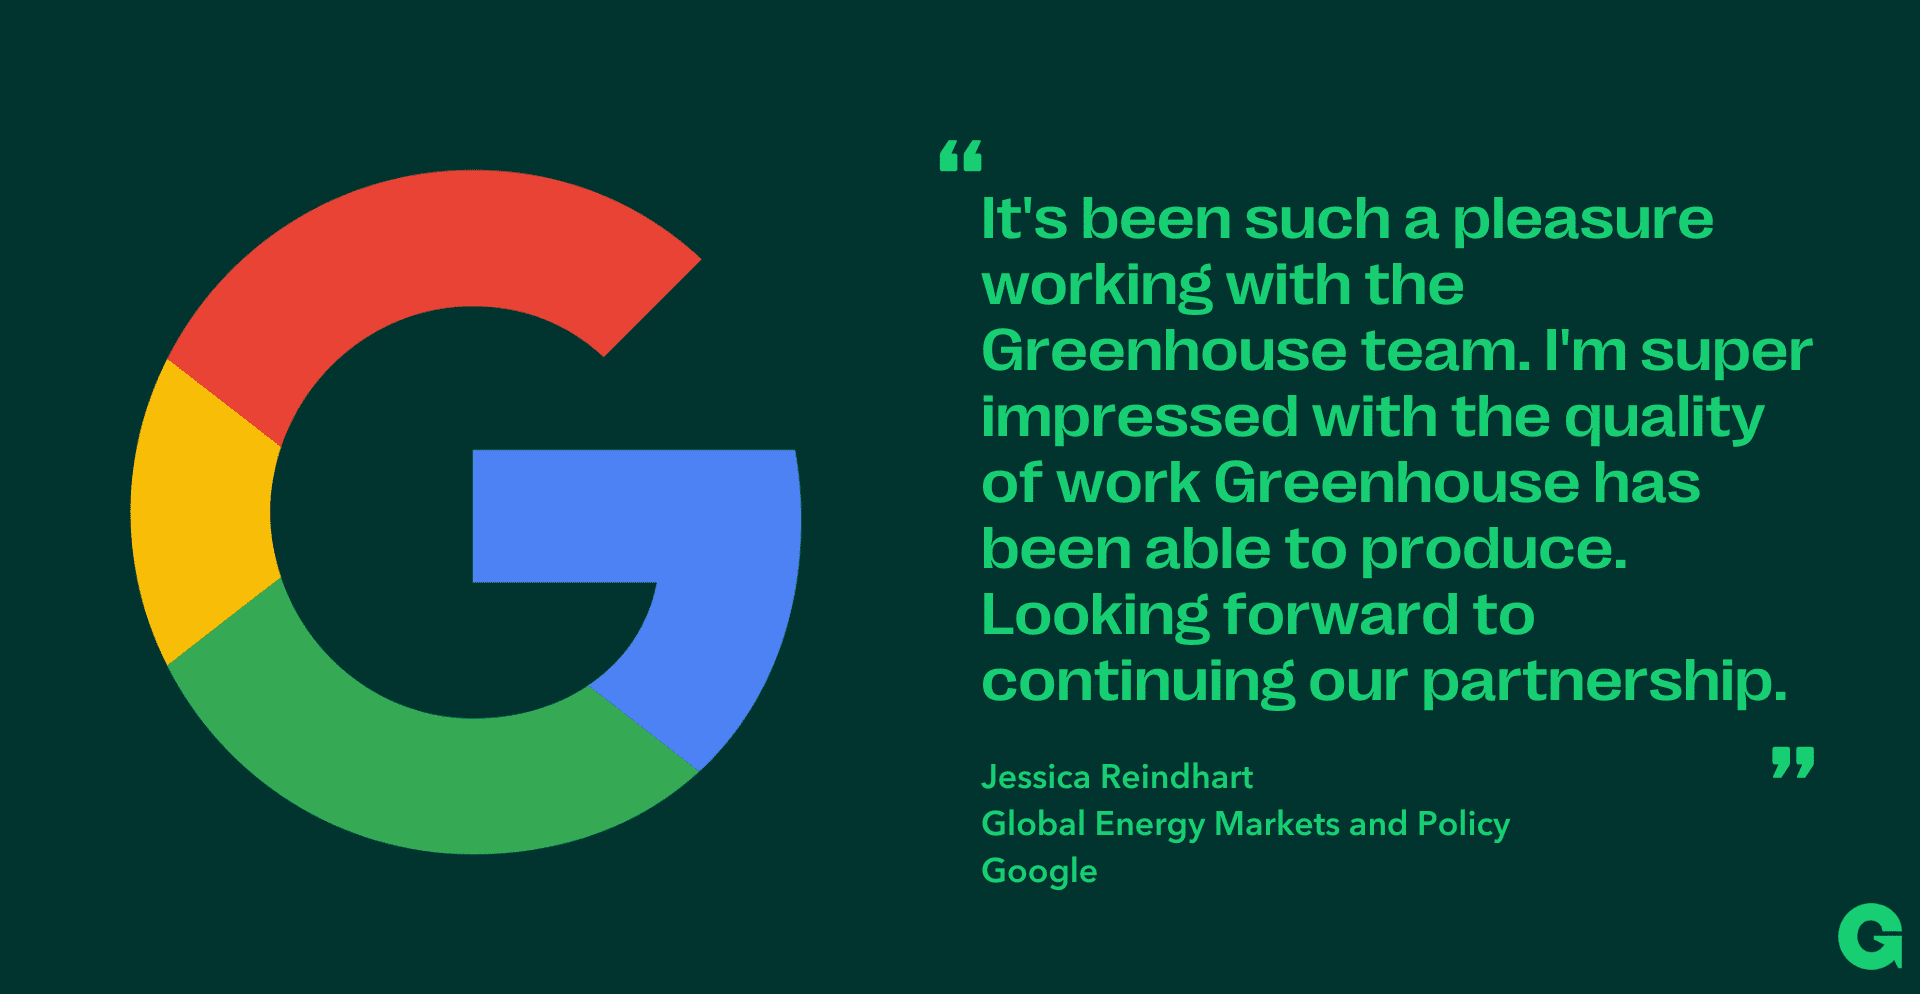 Quote by Jessica Reindhart, Global Energy Markets and Policy in Google